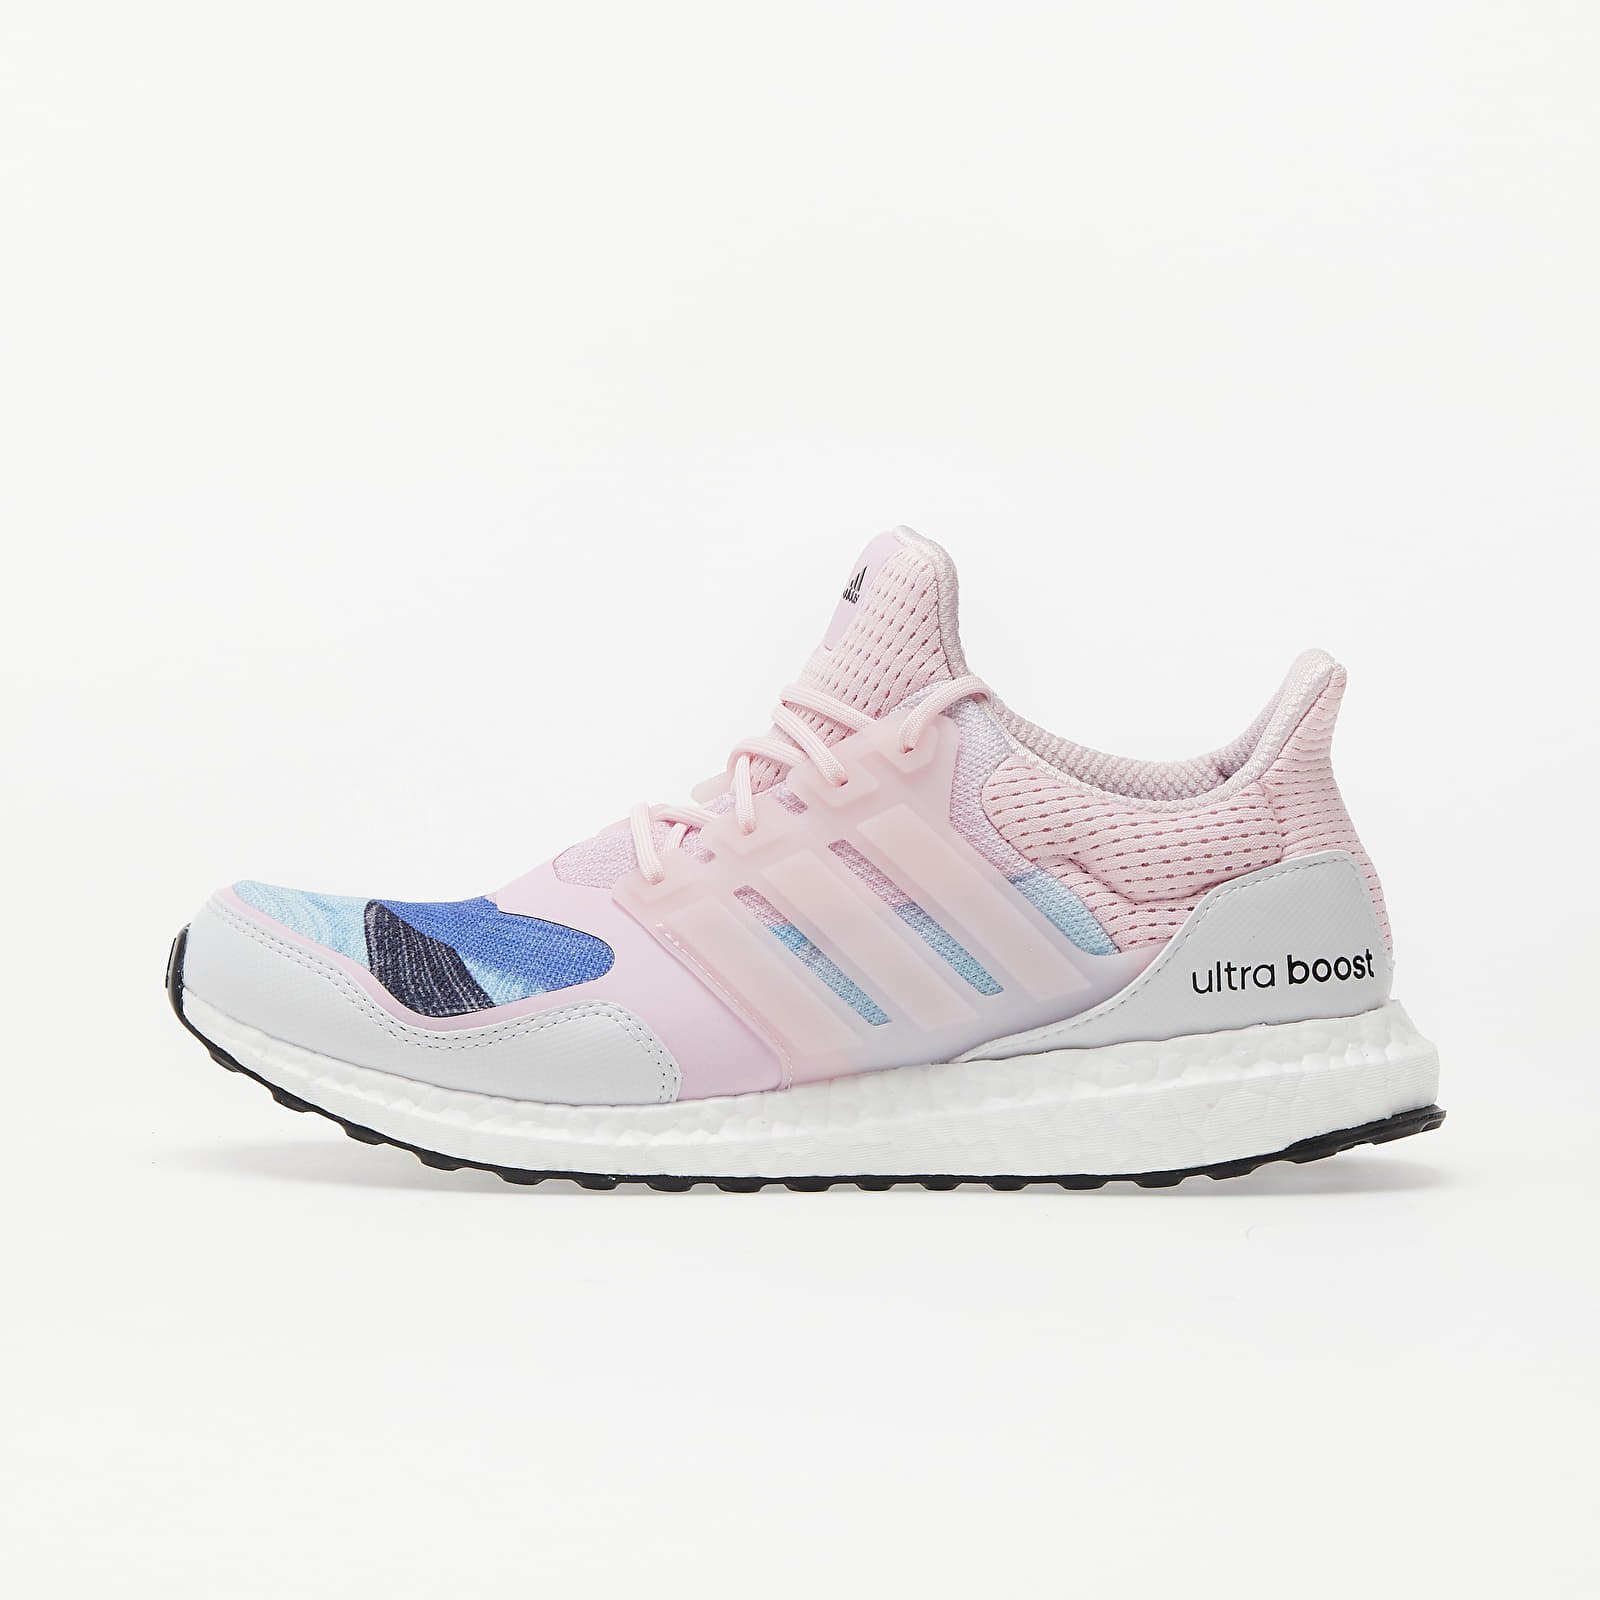 Women's shoes adidas UltraBOOST S&L DNA W Clear Pink/ Clear Pink/ Hazy Blue